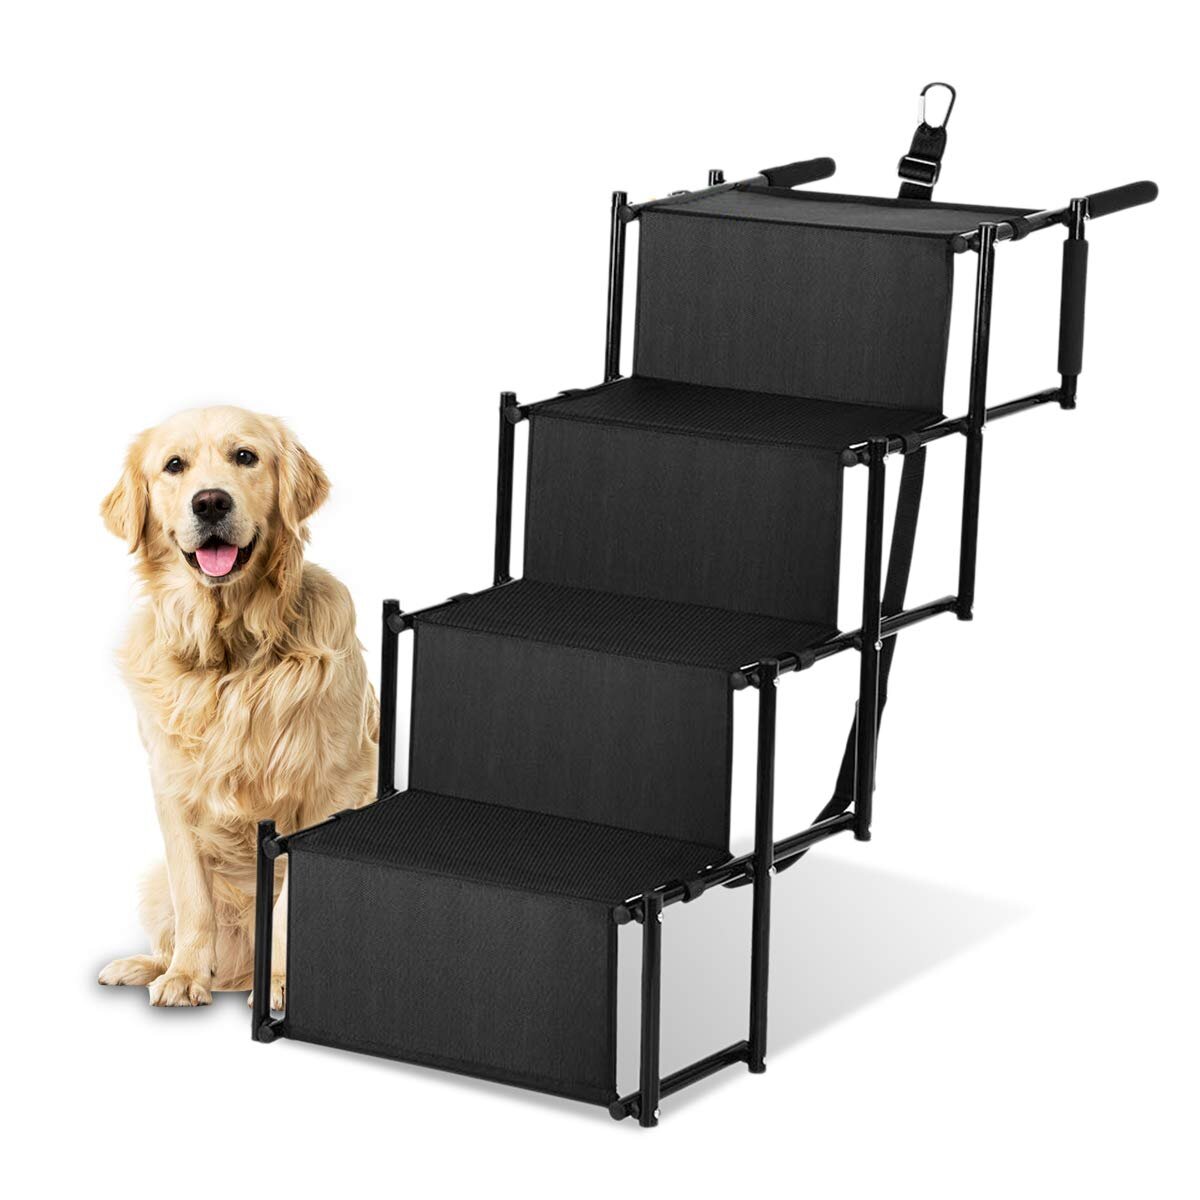 Soft Portable Pet Stairs Cat Dog 3 Steps Ramp Ladder Animal Doggy Small Climb Pet Step Stairs Washable Carpet Tread for Tall Couch Bed Chair Indoor Outdoor Pet Stairs